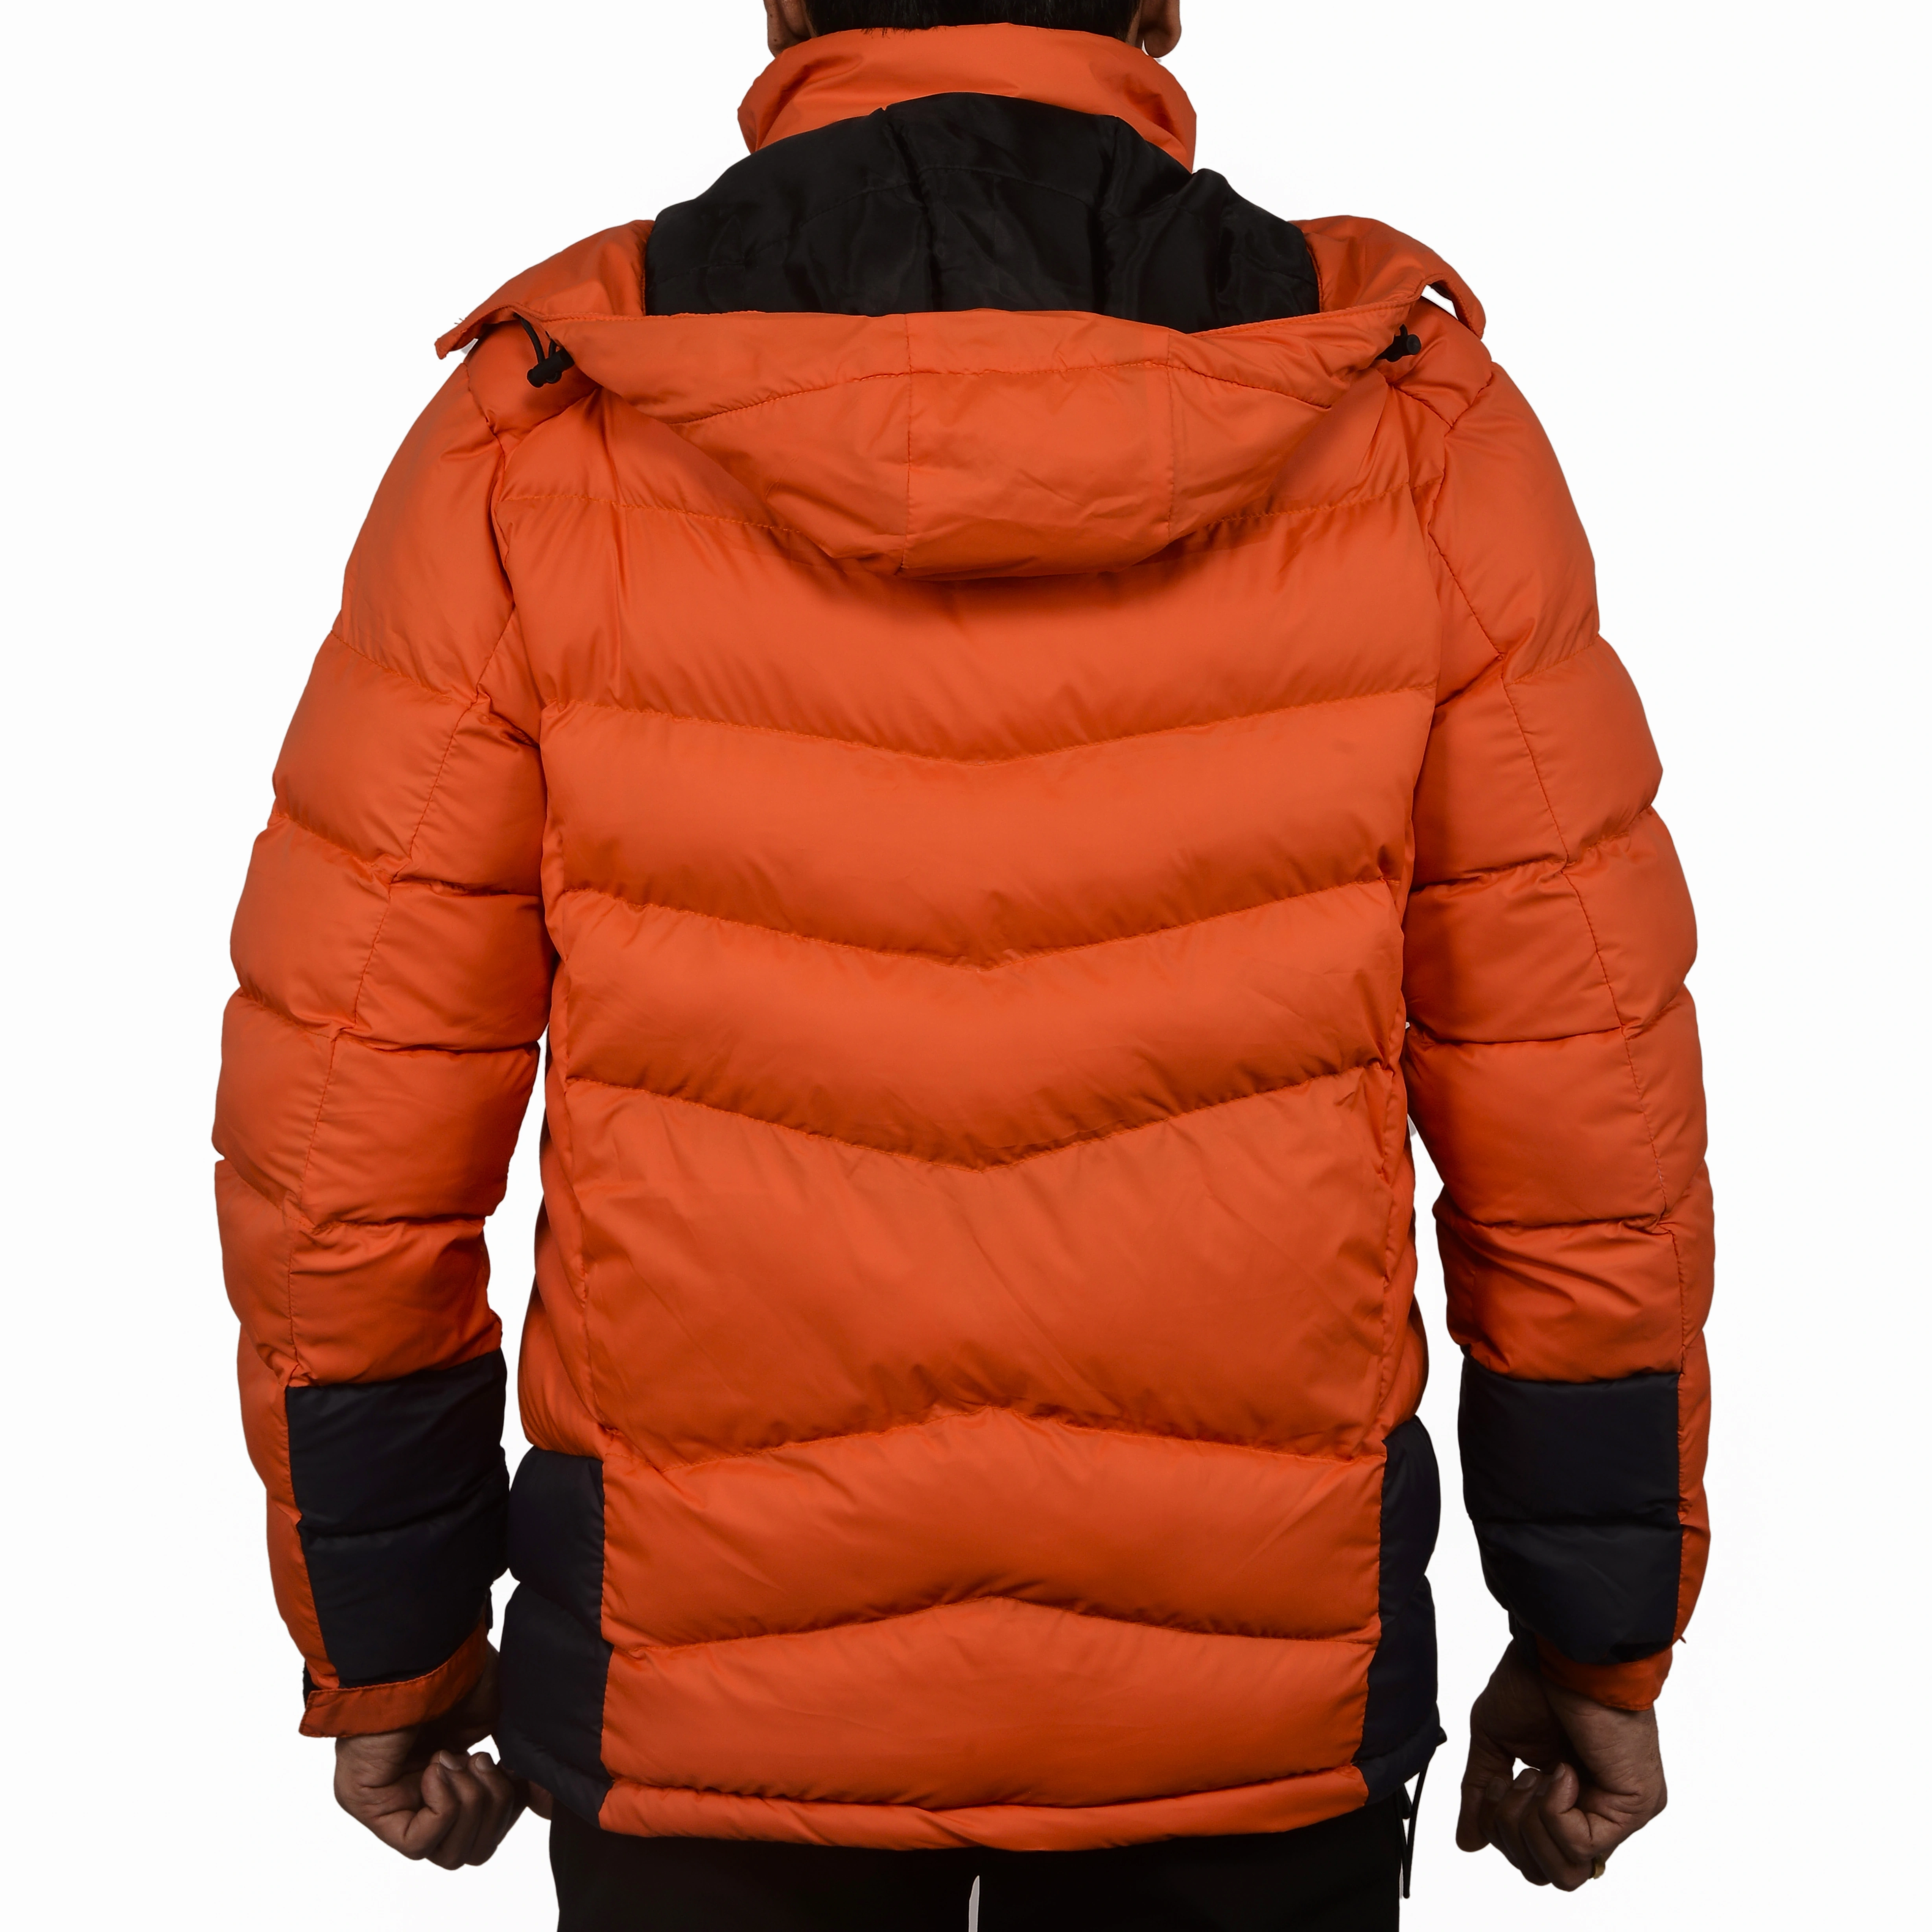 K2 Survivor Down Jacket for Men: Stylized Functionality for Extreme Cold Weather Expeditions (Up to -20°C)-XXL-Orange-4